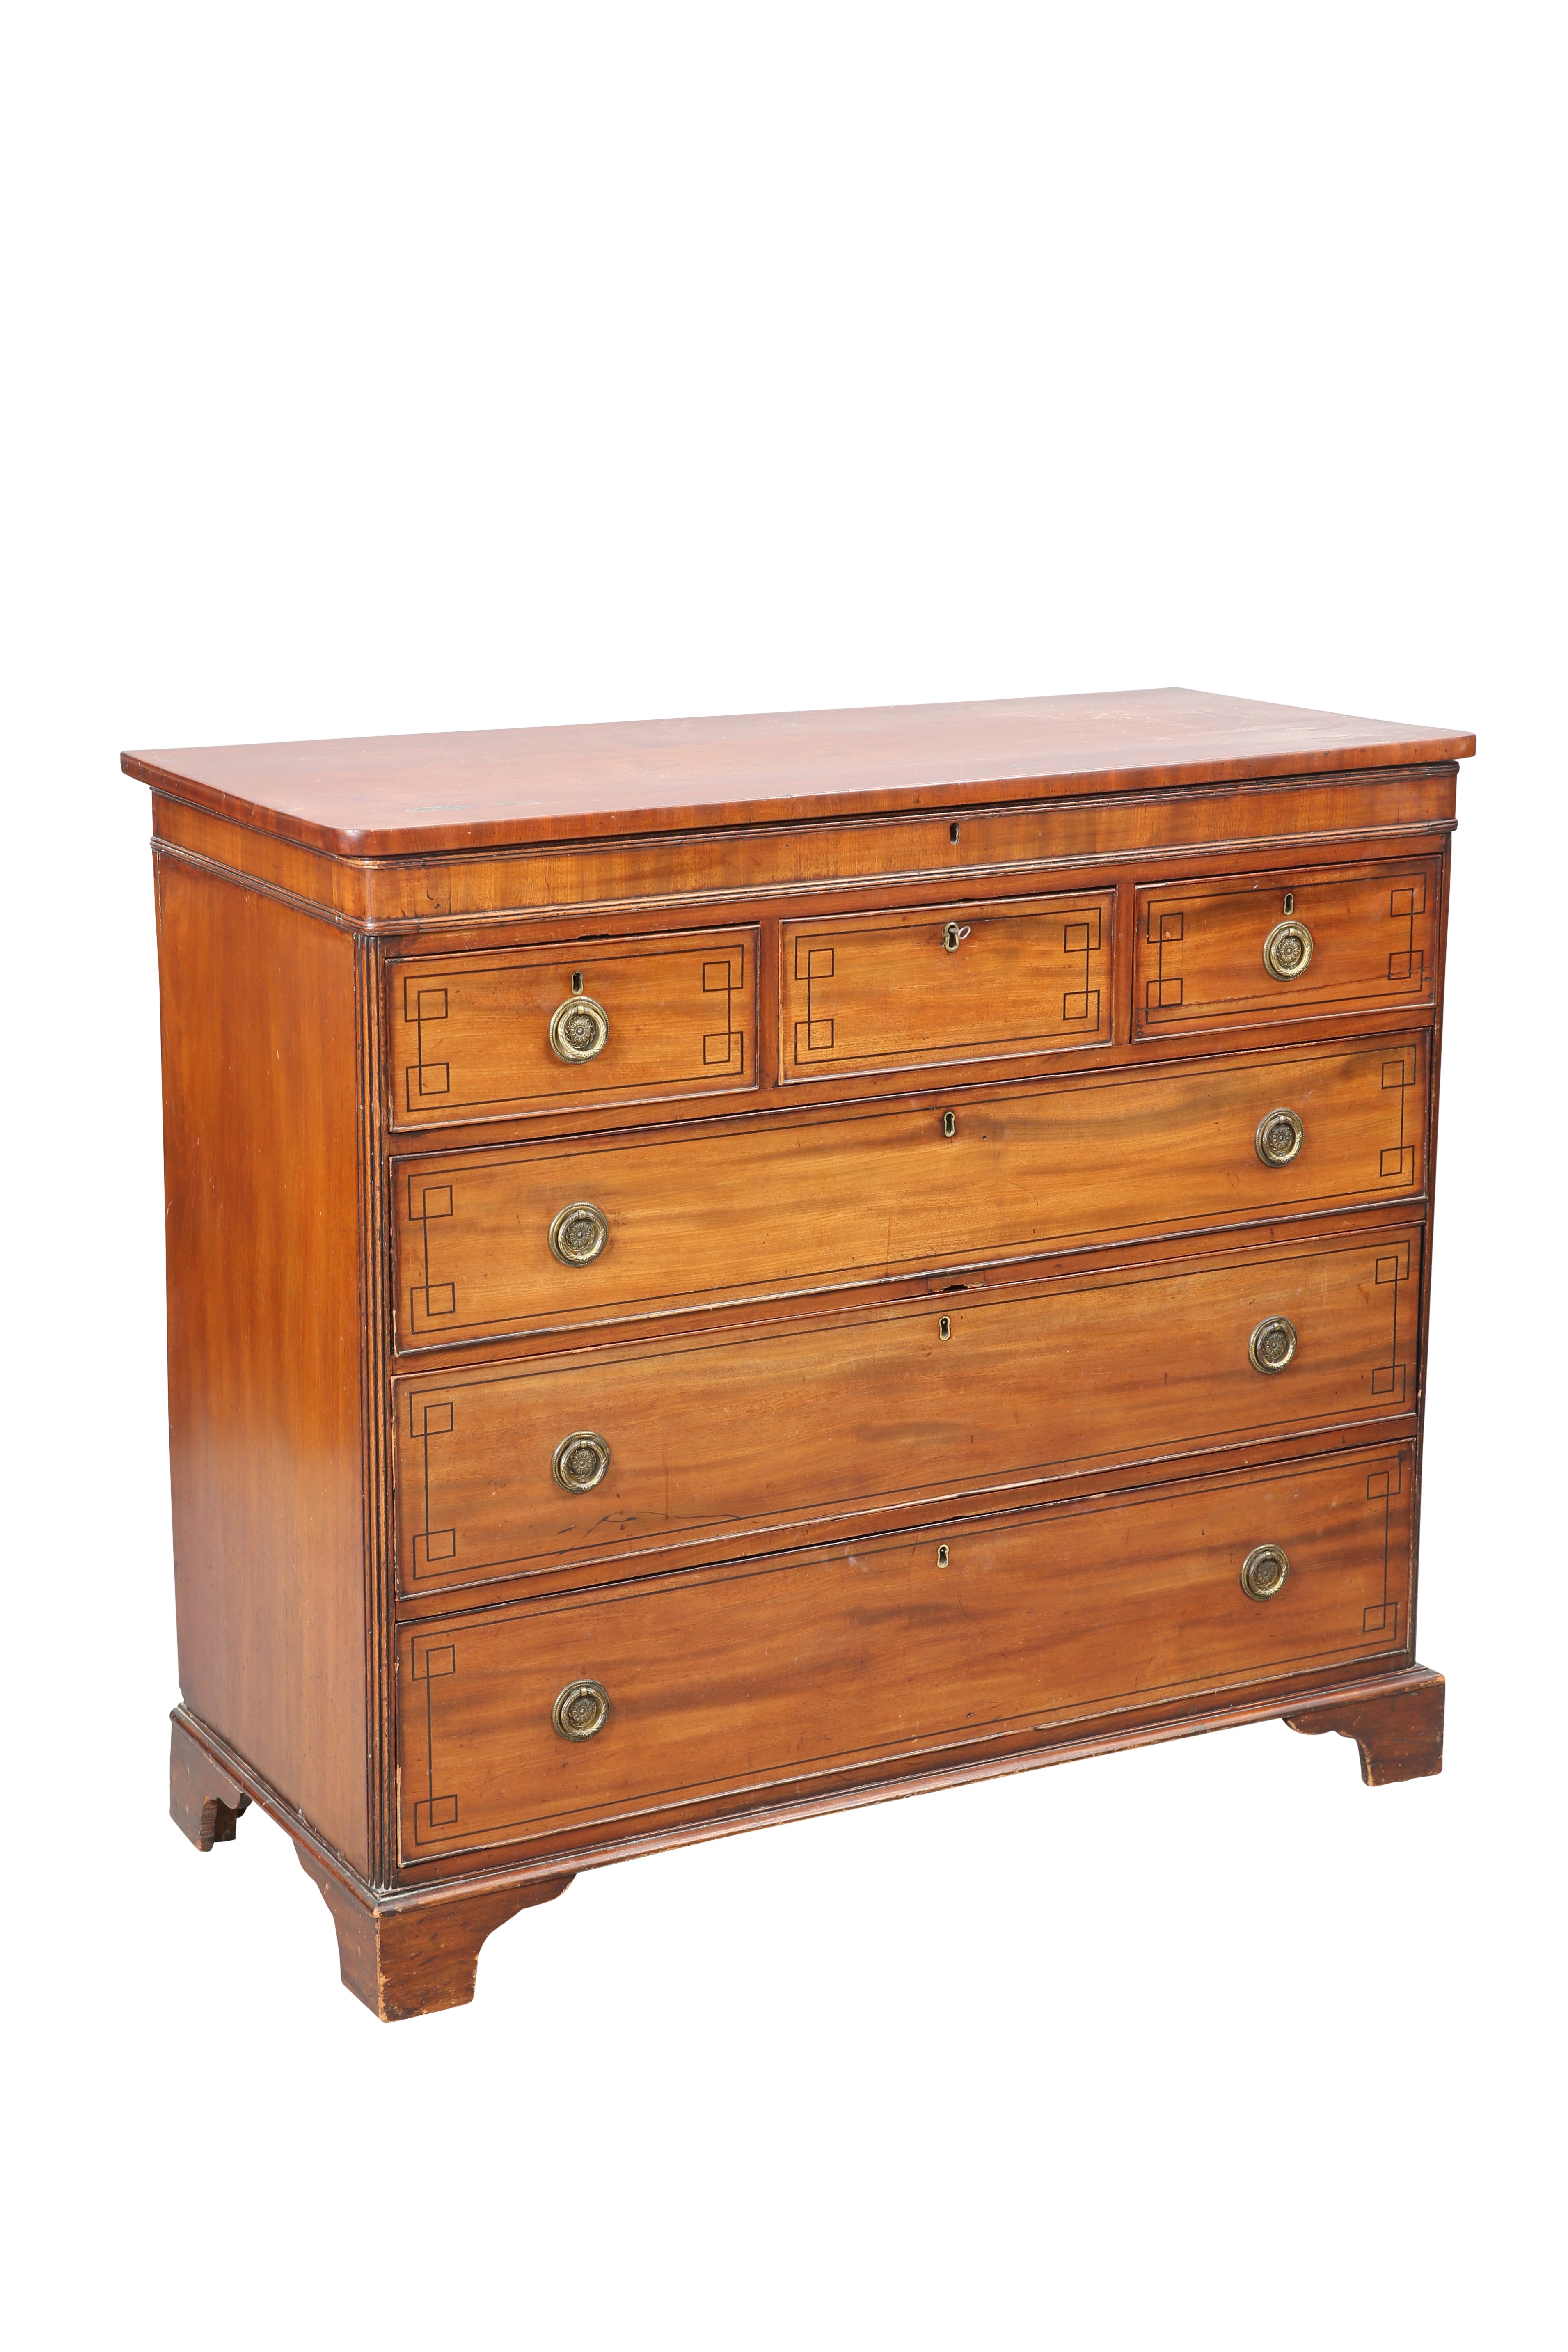 A REGENCY MAHOGANY CHEST OF DRAWERS WITH HINGED TOP - Image 2 of 2